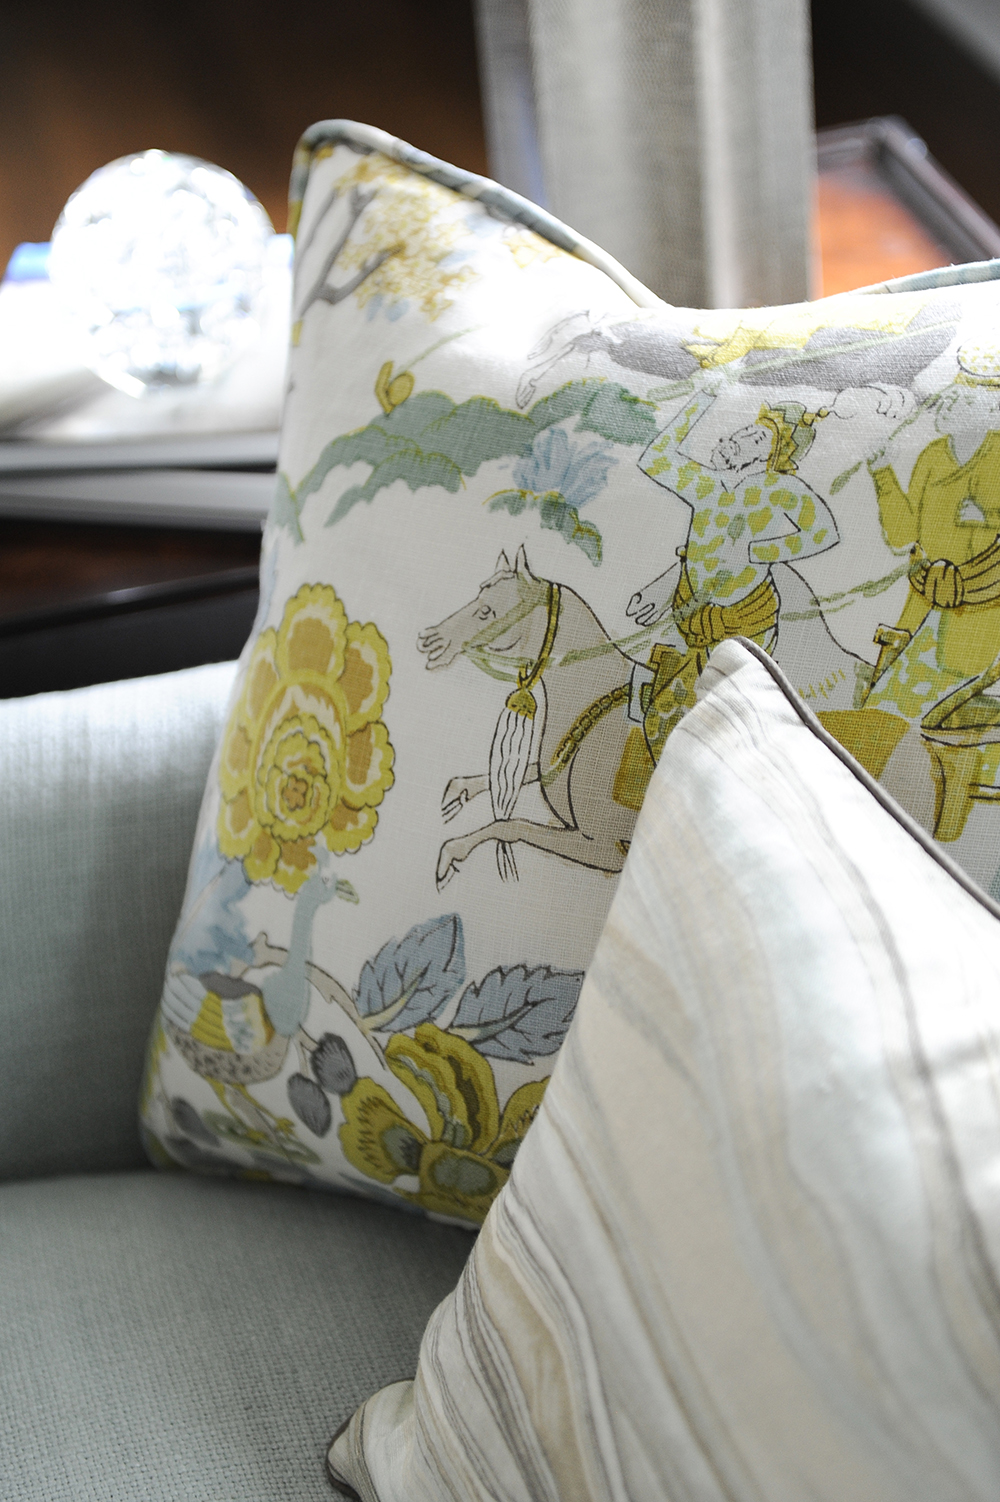 This pillow's bright fabric was the jumping-off point for the home's decor.